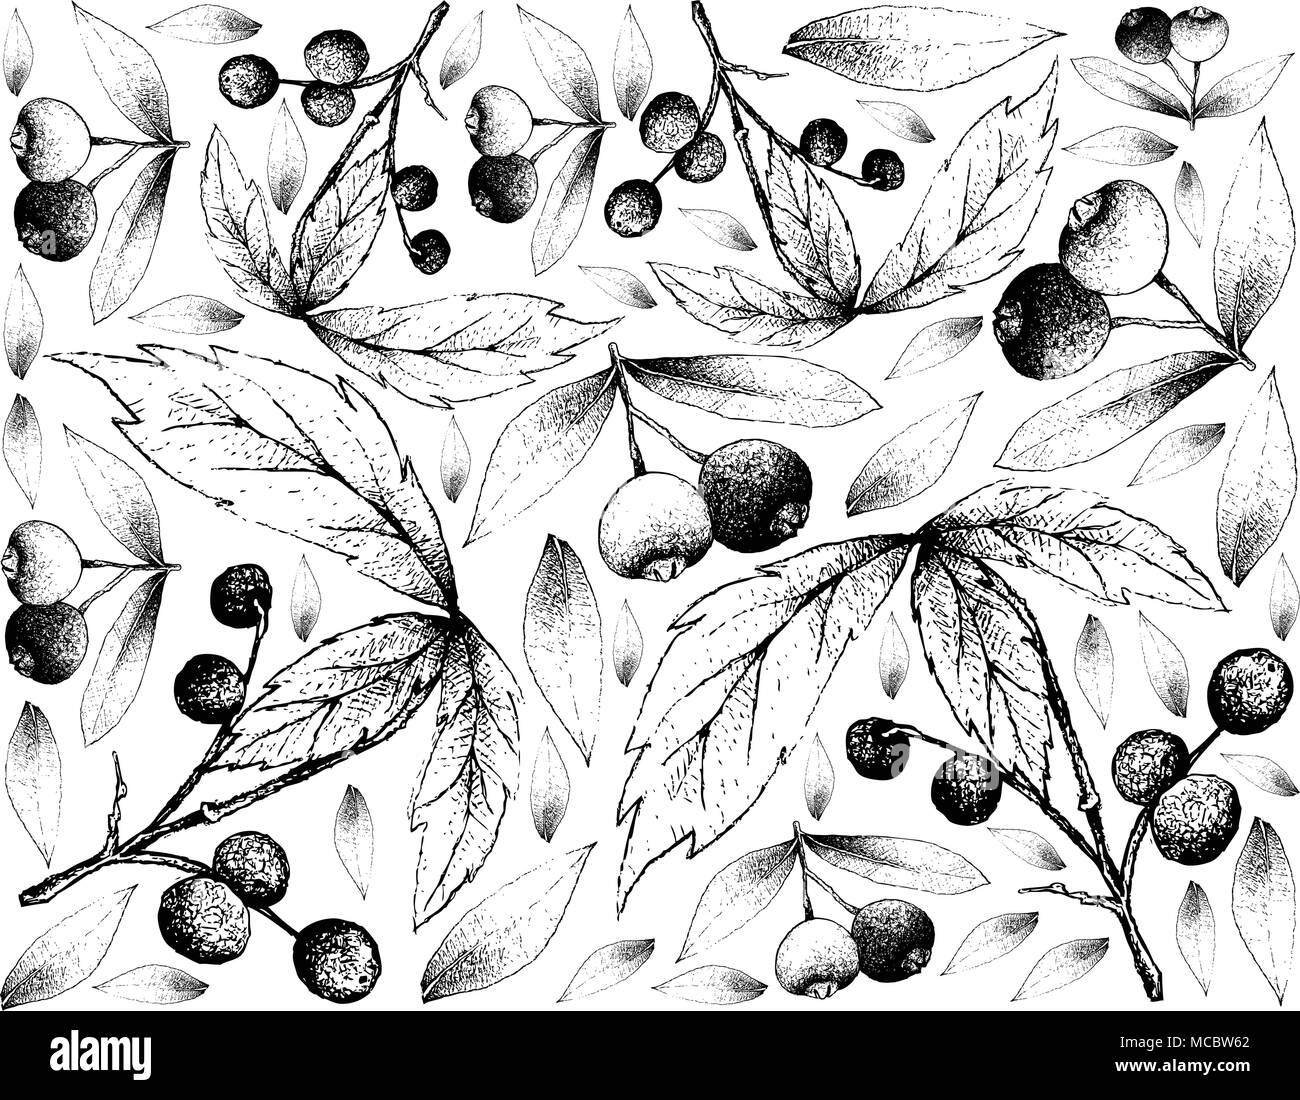 Berry Fruit, Illustration Wallpaper Background of Hand Drawn Sketch of Brush Cherry or Syzygium Australe and Allophylus Edulis or Chal-Chal Fruits. Stock Vector